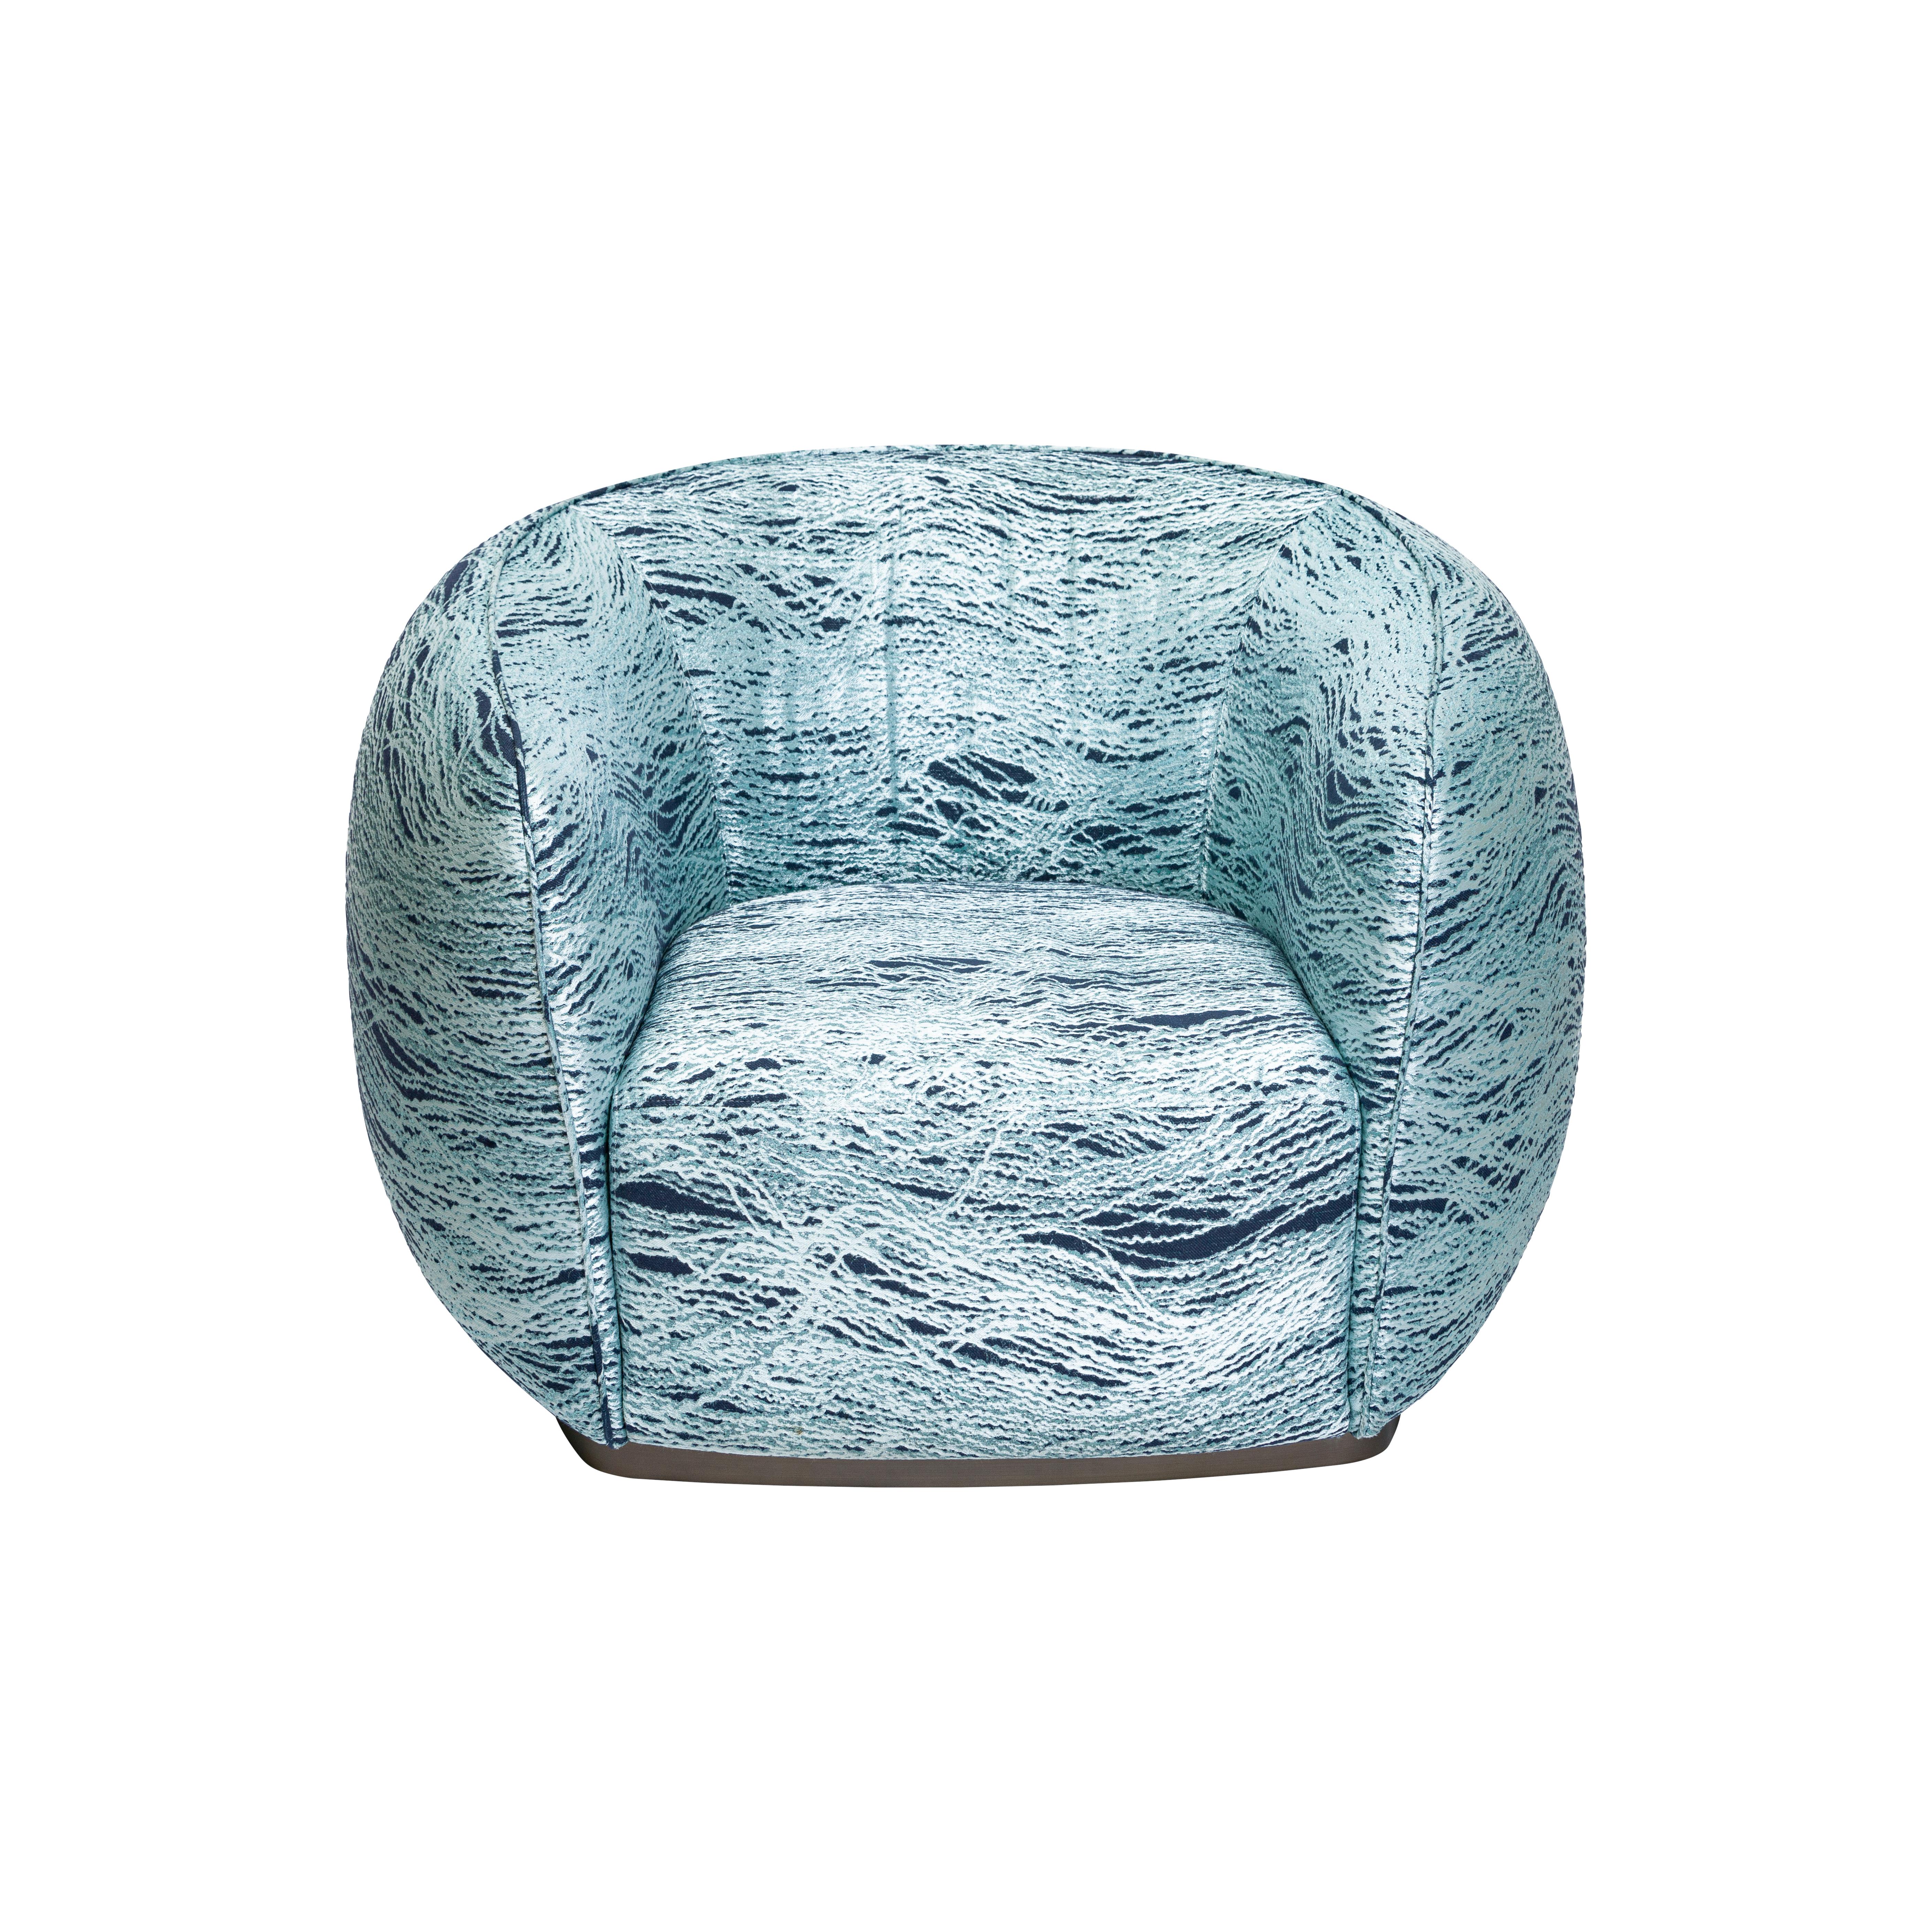 21st century Art Deco Elie Saab Maison Marino Acqua fabric Elite armchair, Italy

Rich and powerful, Elite is a timeless classic able to distinguish itself through exclusive details and exquisite craftsmanship of its futuristic lines. Accentuated by